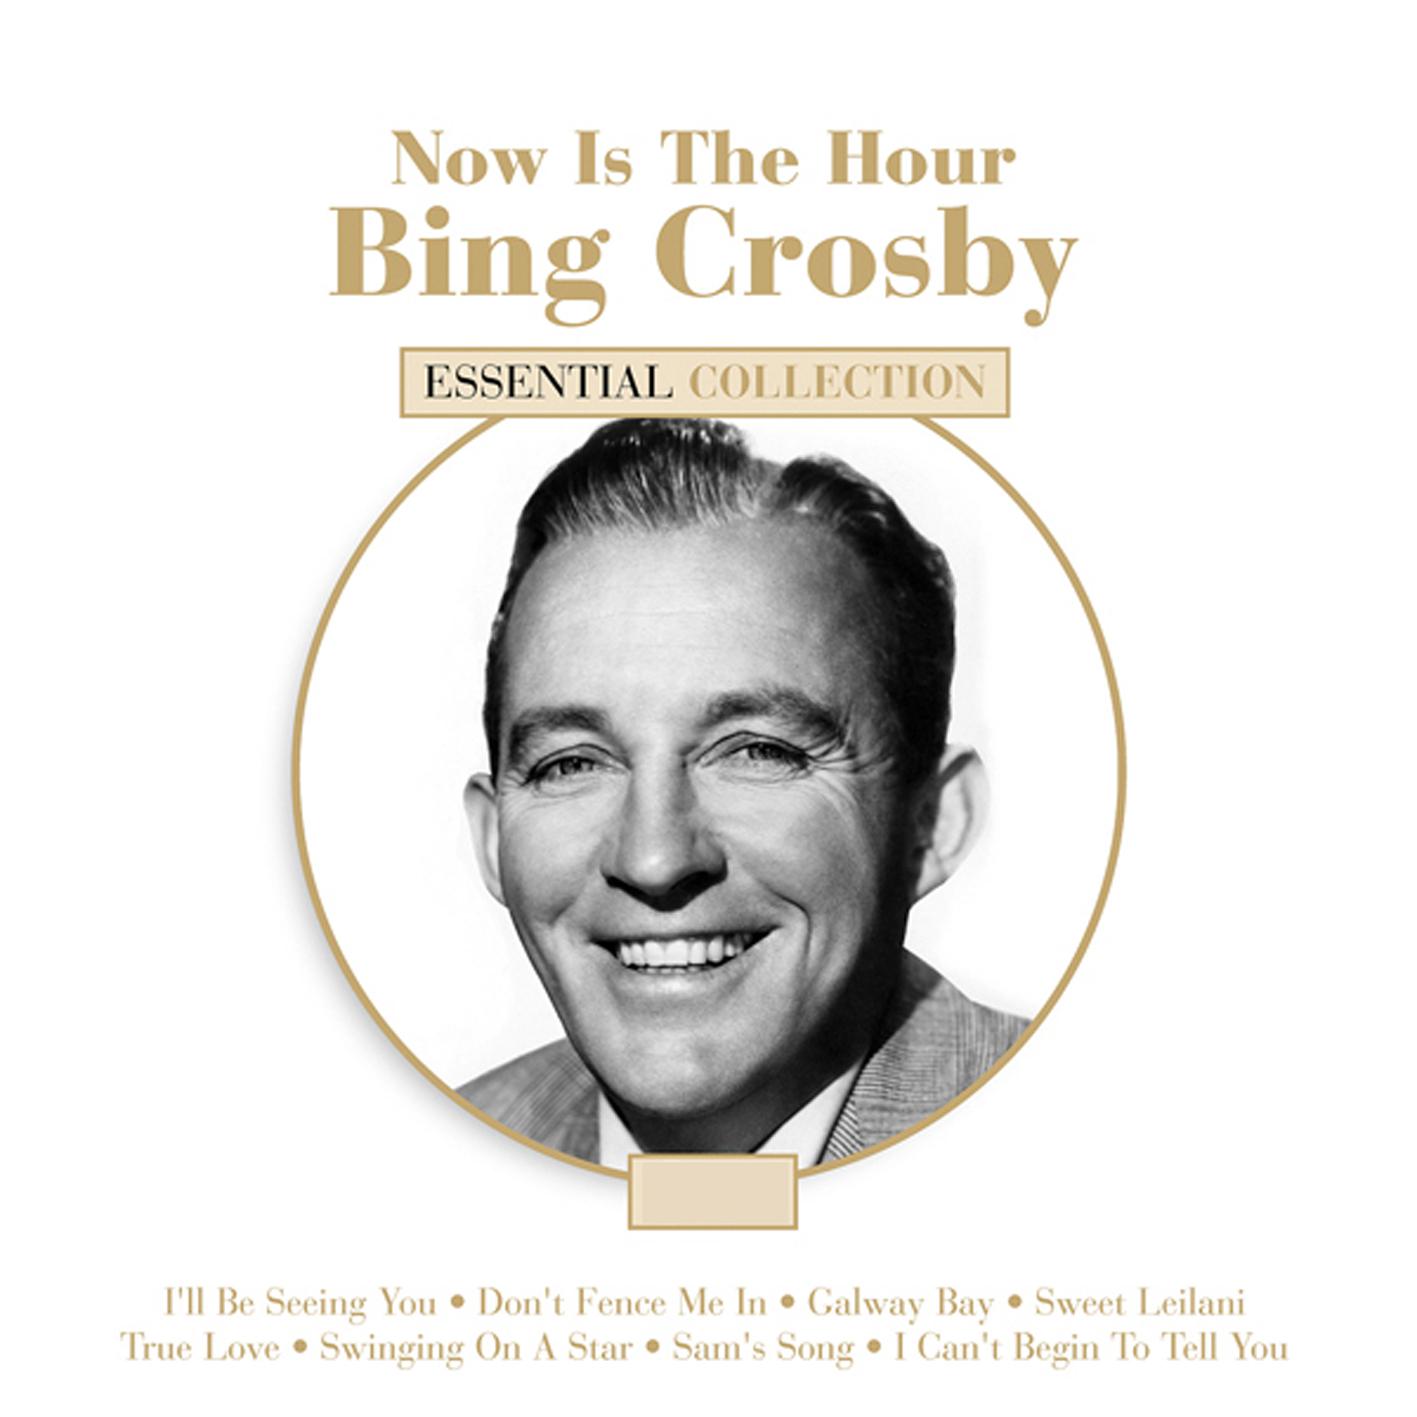 Now is the Hour - Bing Crosby